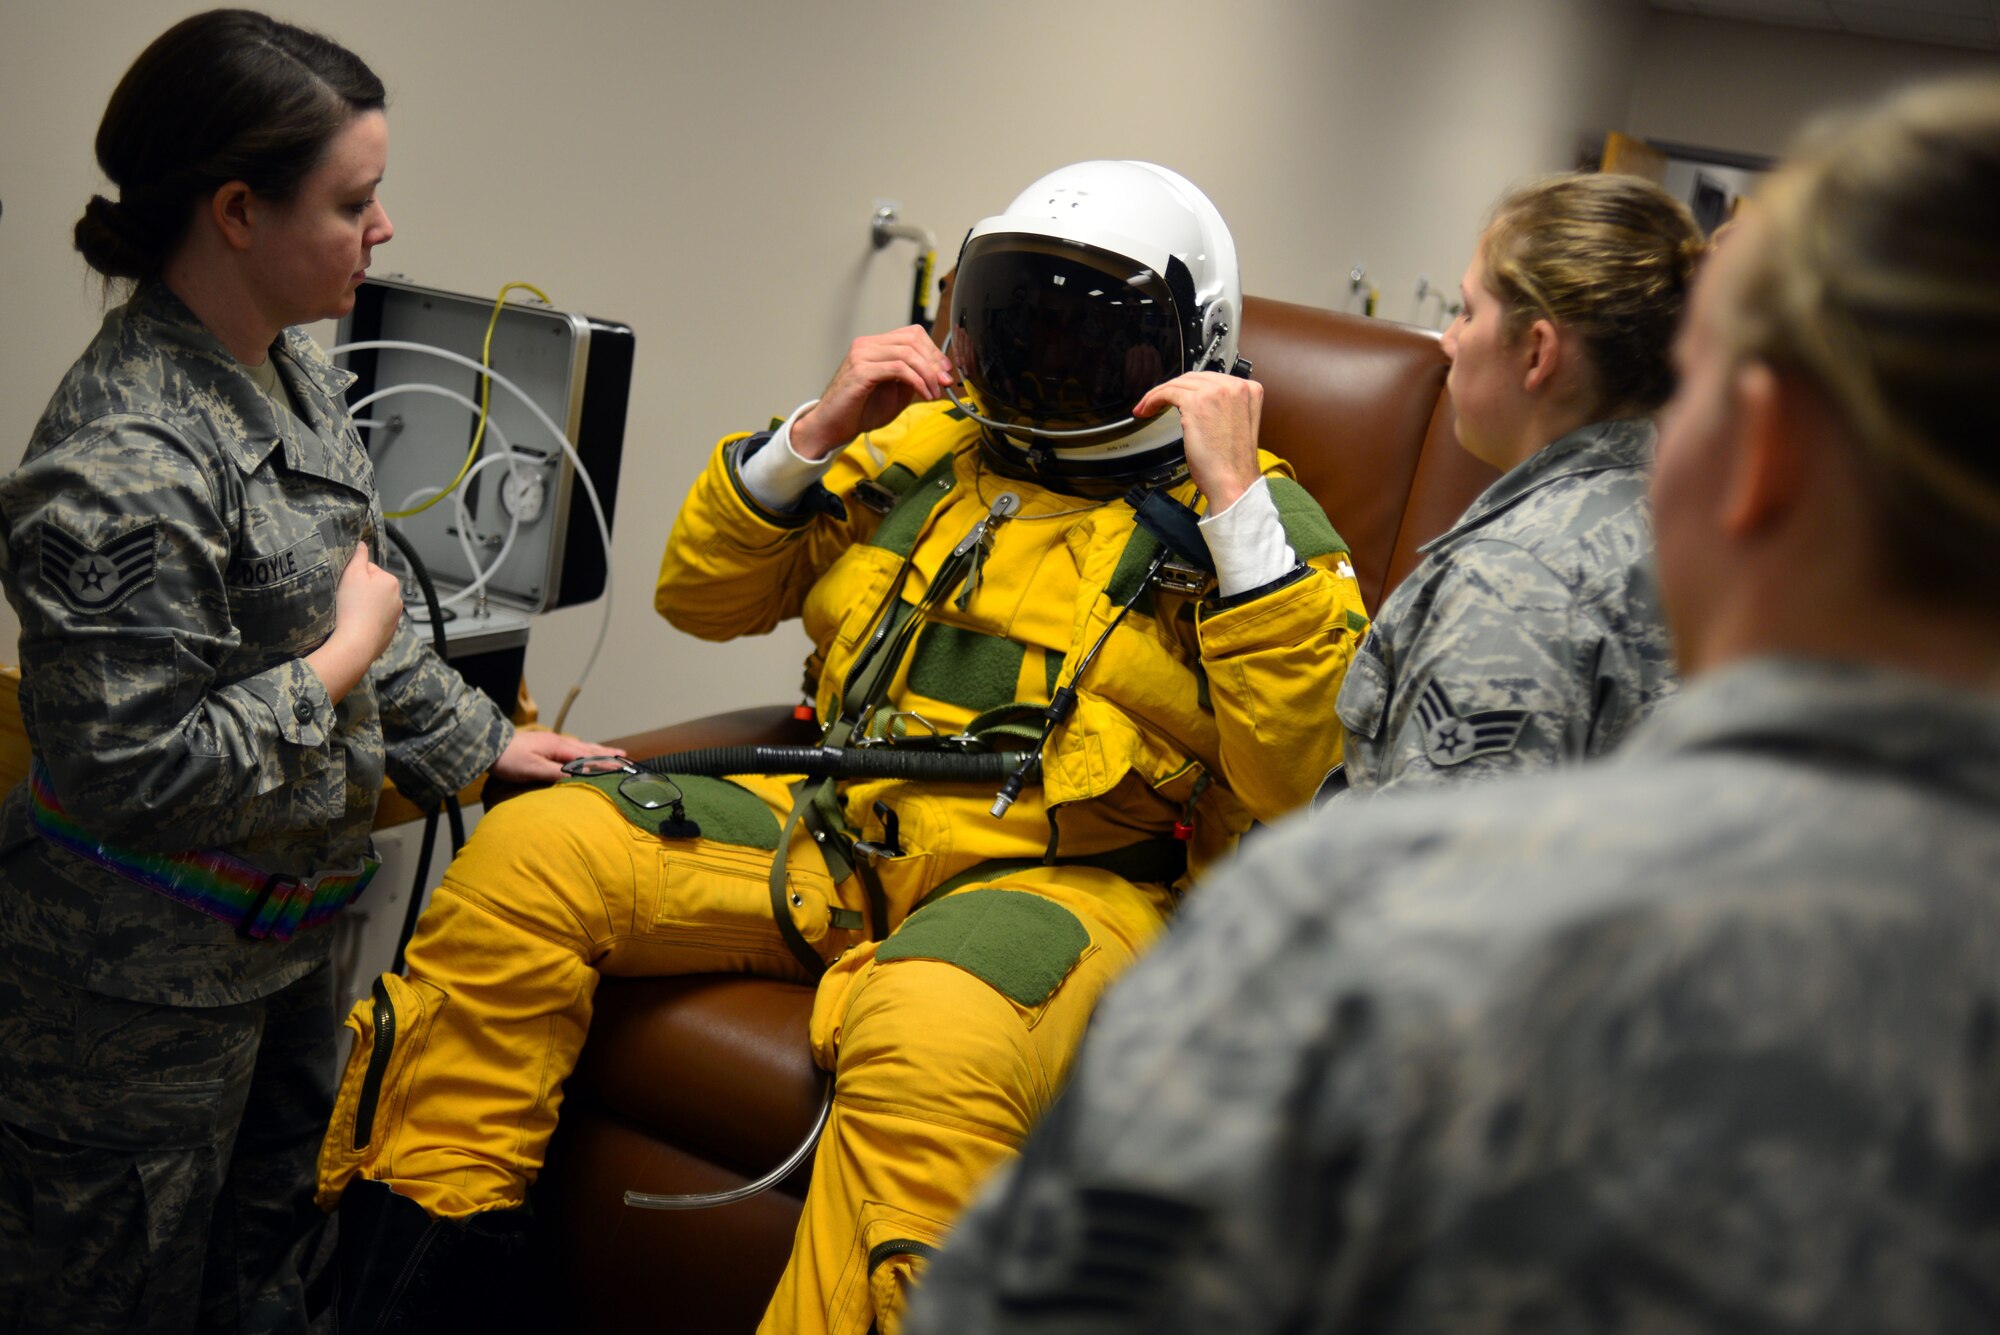 U-2 pilot Capt. Travis dawns the sun visor on his pressure suit helmet during pre-flight suit dawning in preparation for a “high flight” in the U-2 Dragon Lady Jan. 8, 2013, at Beale Air Force Base, Calif. The full pressure suit, developed by the U.S. Air Force has been adopted by NASA and other agencies for use by astronauts and other high altitude crews. (U.S. Air Force photo by Airman 1st Class Drew Buchanan/Released)